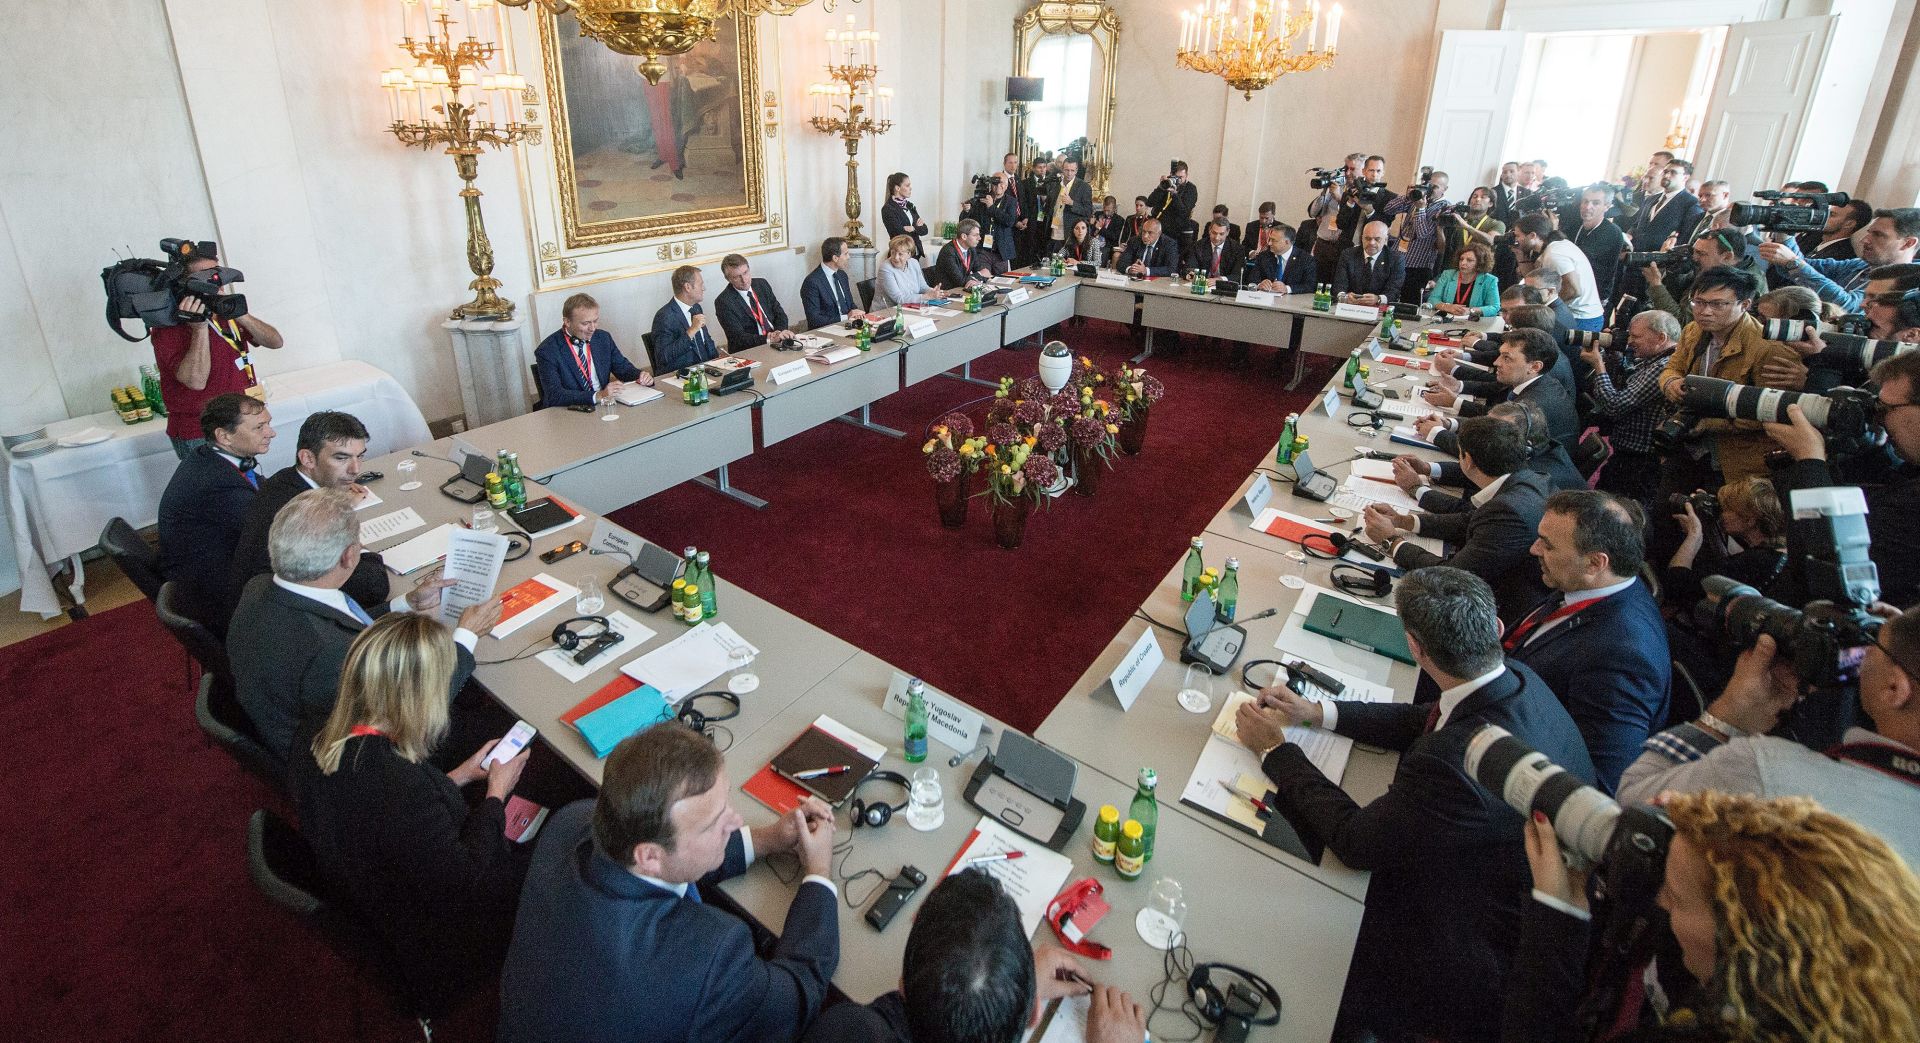 epa05554100 Participants attend the Summit 'Migration along the Balkan route' in Vienna, Austria, 24 September 2016. Austrian Chancellor Christian Kern invited Heads of Government of Albania, Bulgaria, Germany, Greece, Croatia, FYROM (Former Yugoslav Republic of Macedonia), Serbia, Slovenia, Hungary, the President of the European Council, the European Commissioner for Migration and Interior Minister of Romania to discus a common strategy for the migrants situation along the Balkan route.  EPA/CHRISTIAN BRUNA